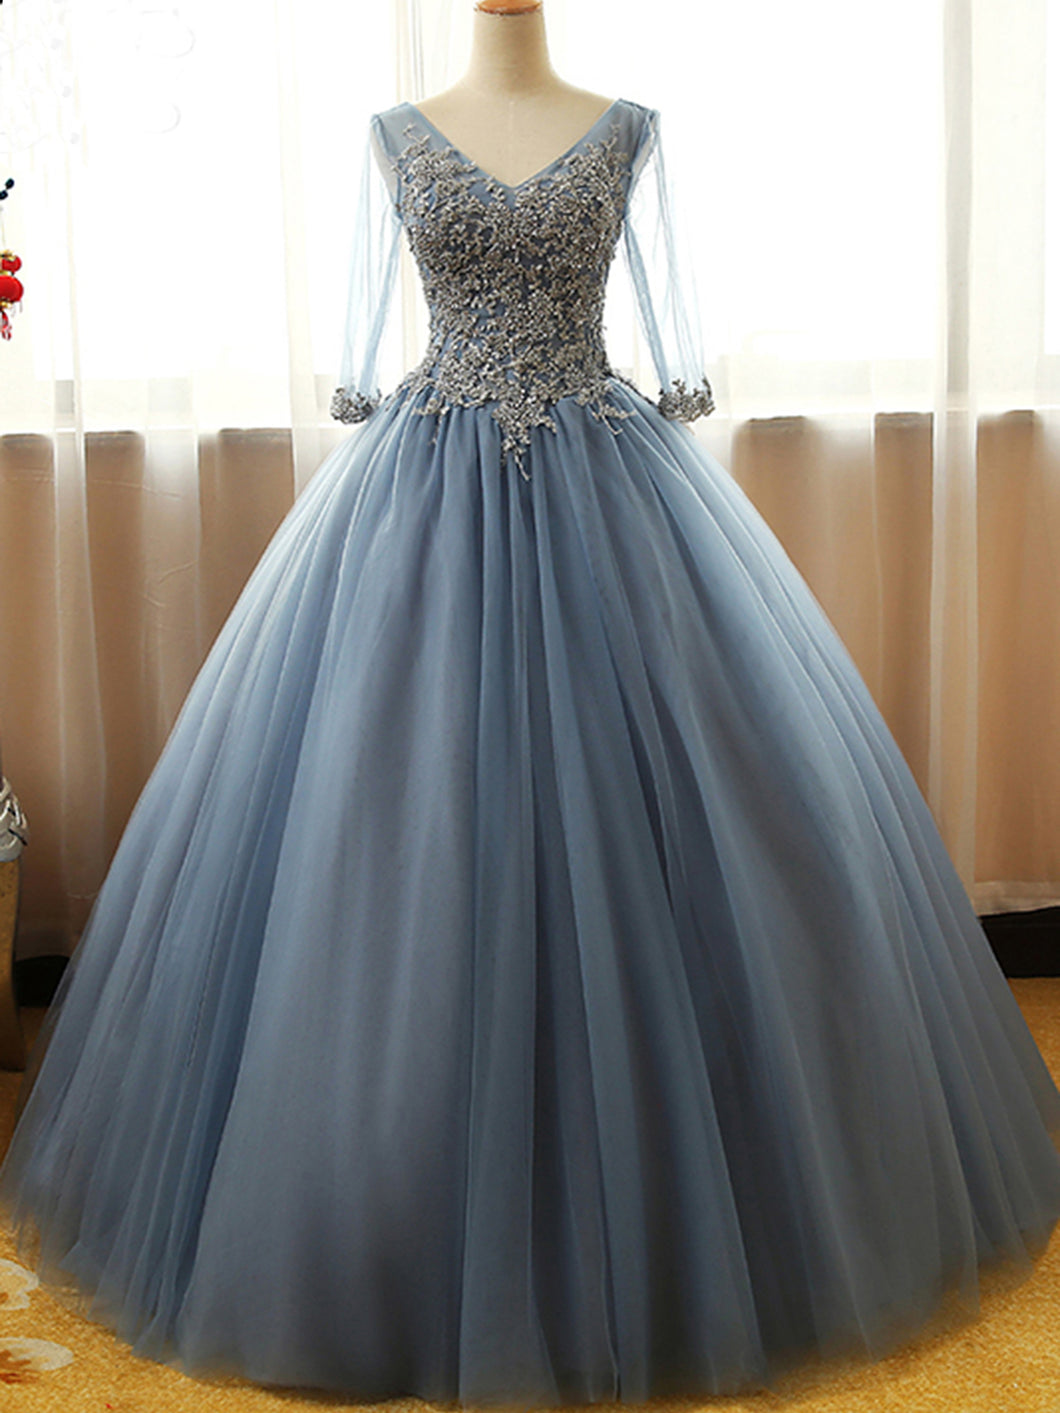 dusty blue ball gown